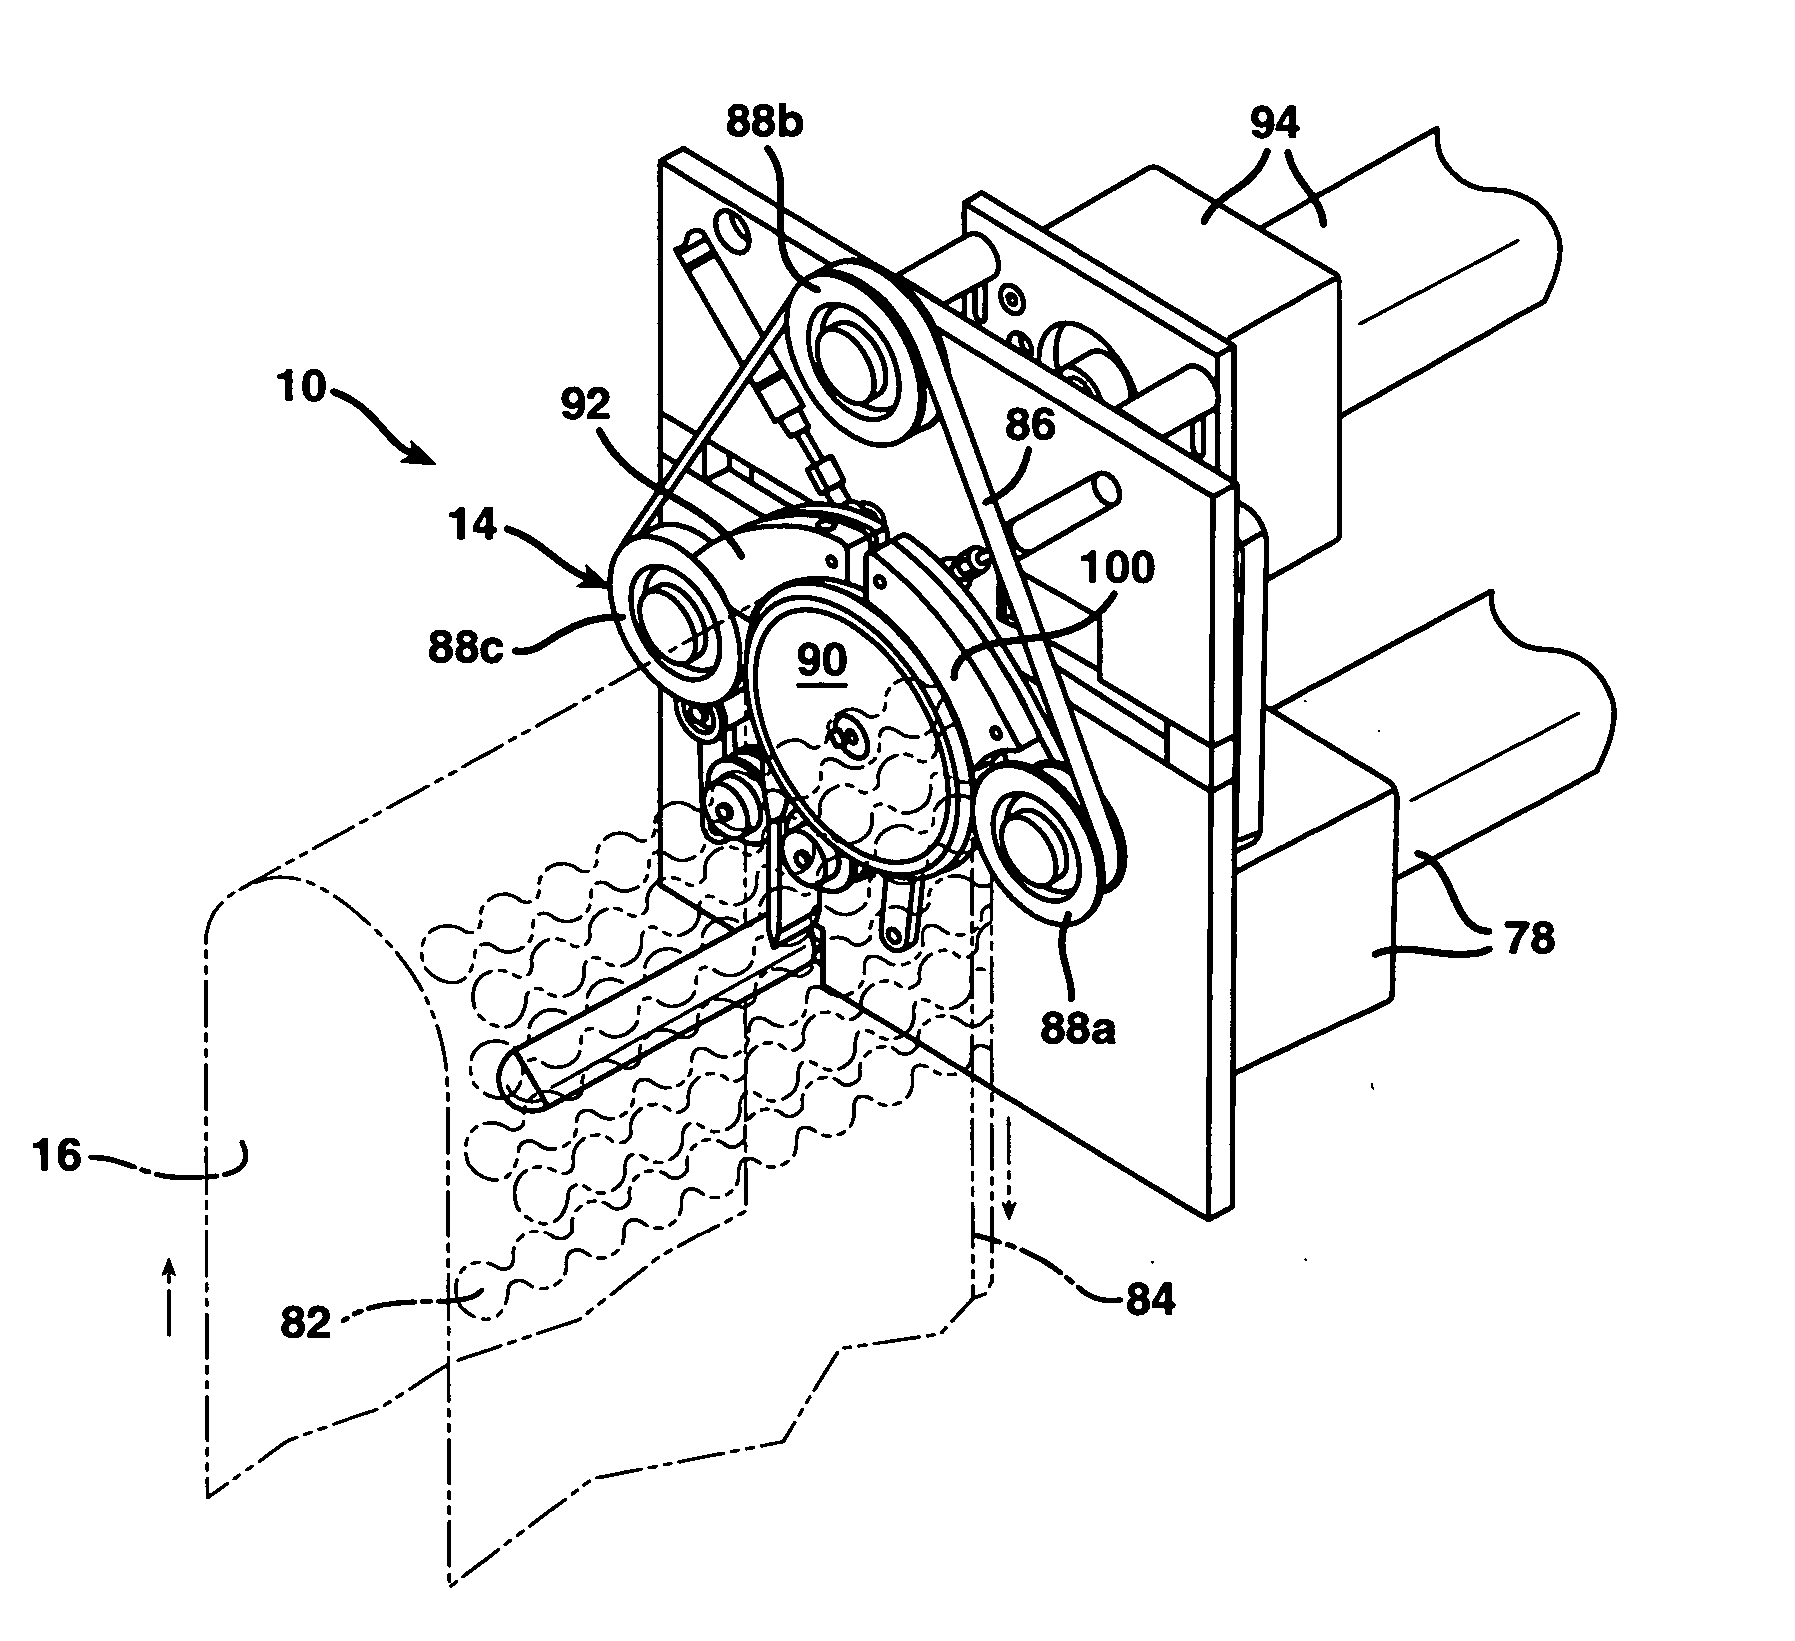 Inflation device for forming inflated containers